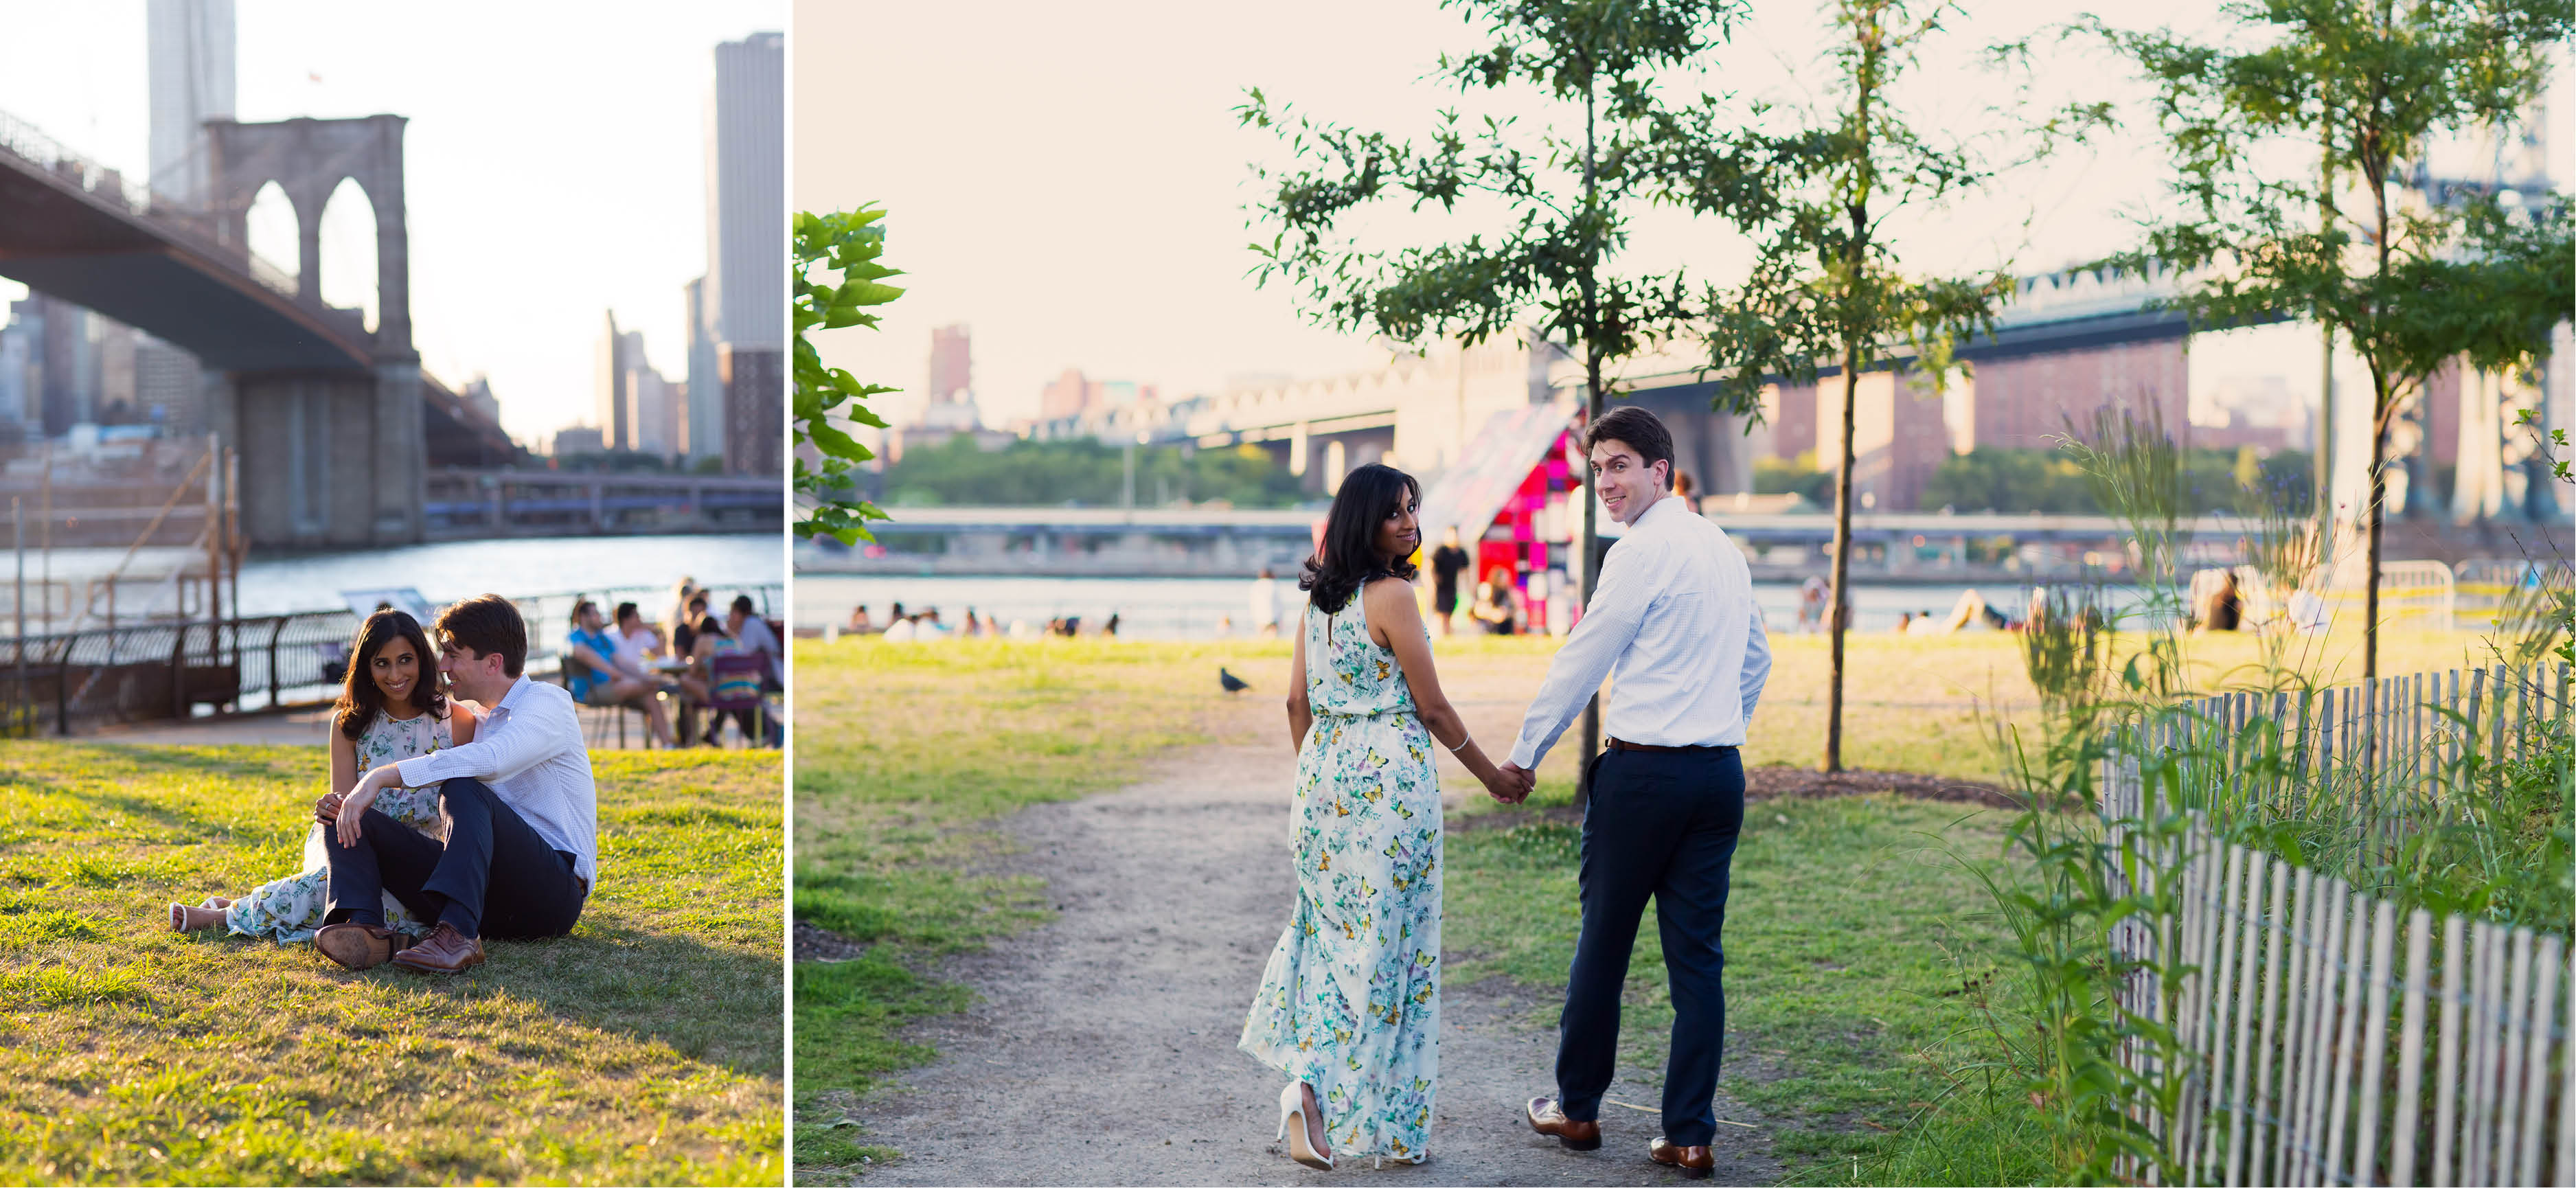 Emma_cleary_photography dumbo engagement11